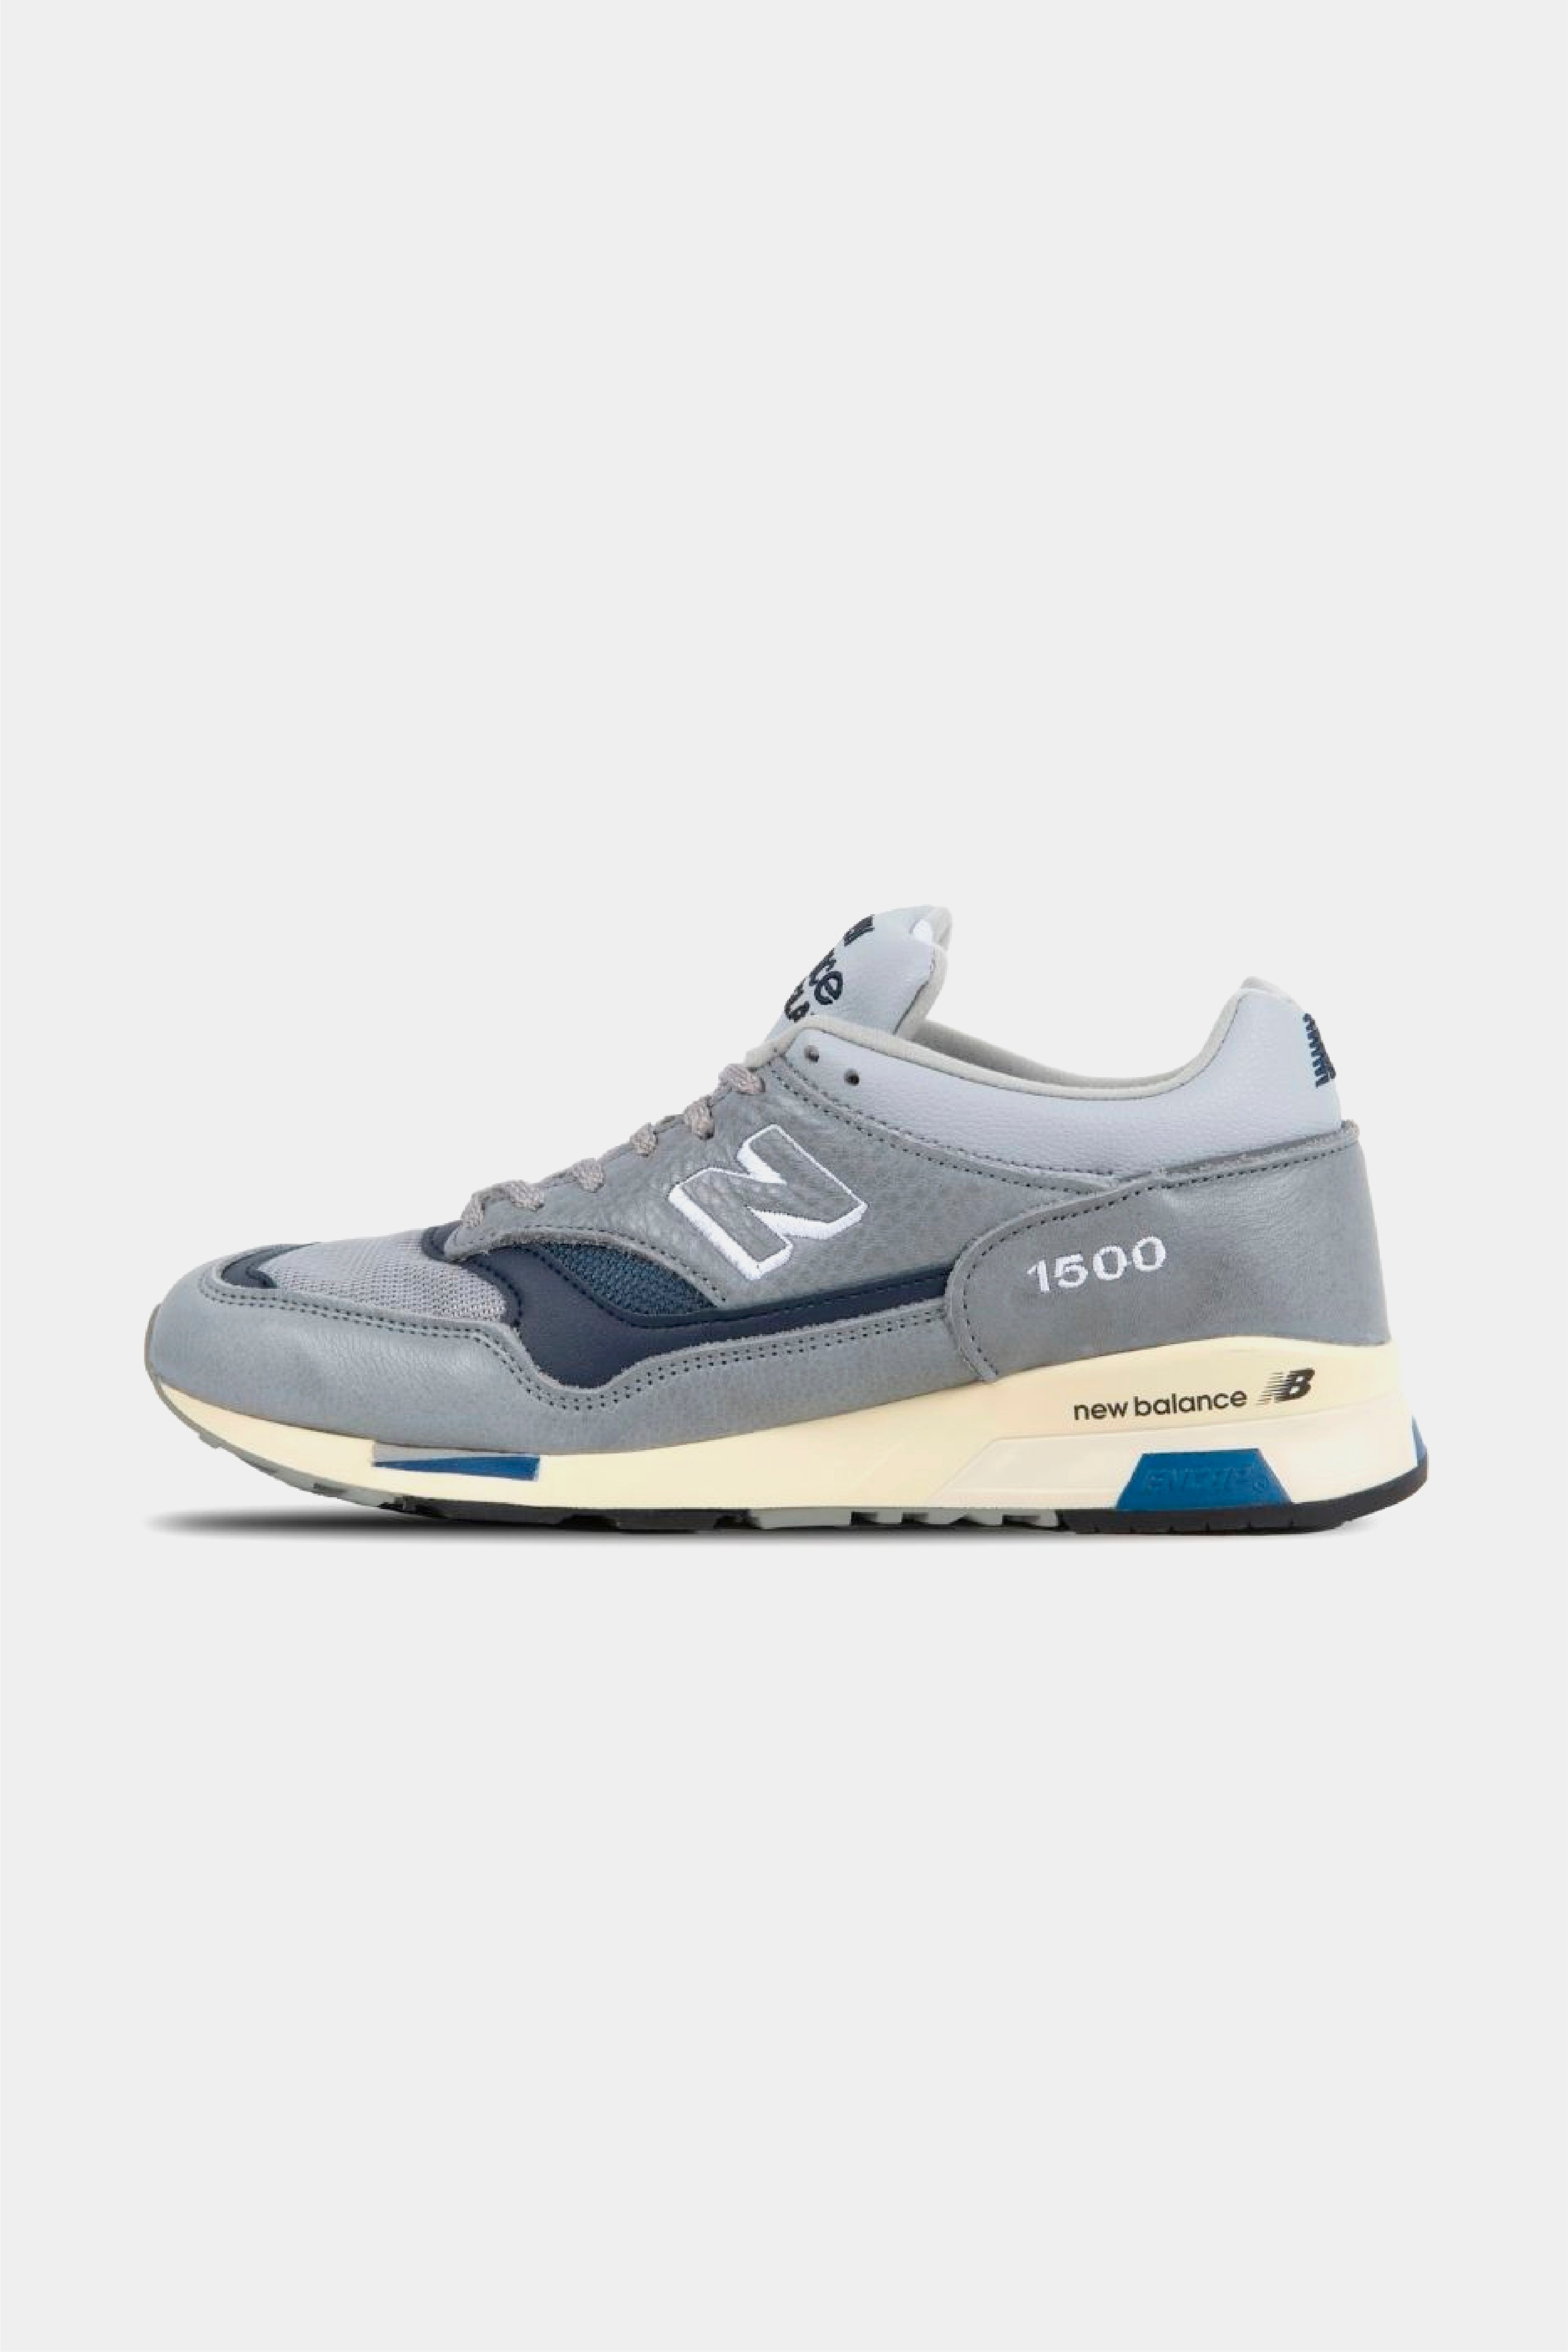 Selectshop FRAME - NEW BALANCE 1500 Made In UK "Blue And Grey" Footwear Concept Store Dubai